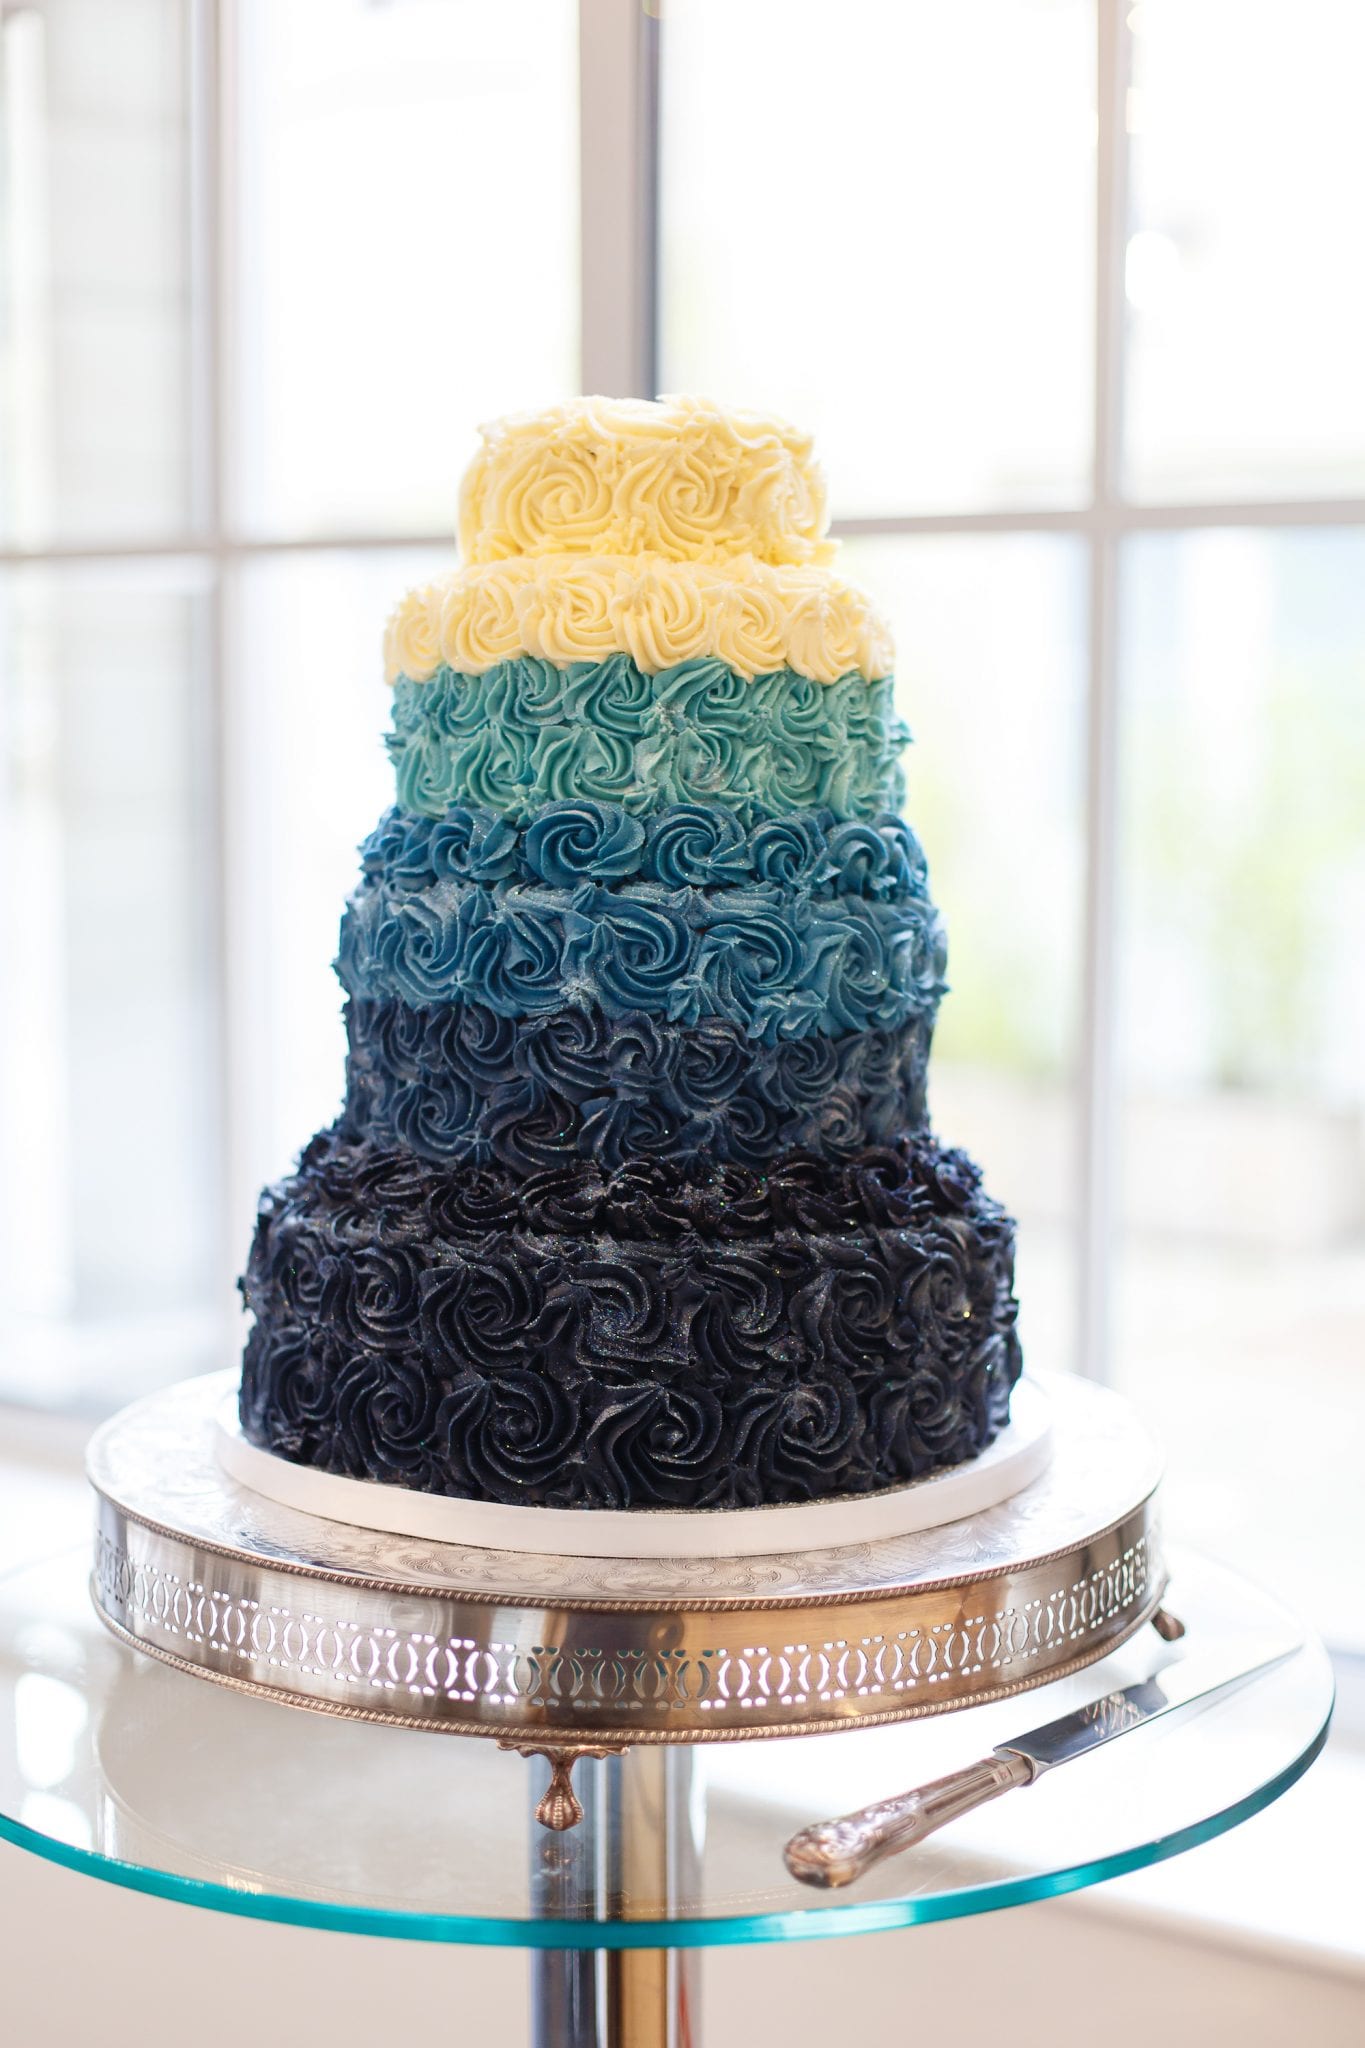 four tiered, blue butter cream iced wedding cake at Botleys Mansion